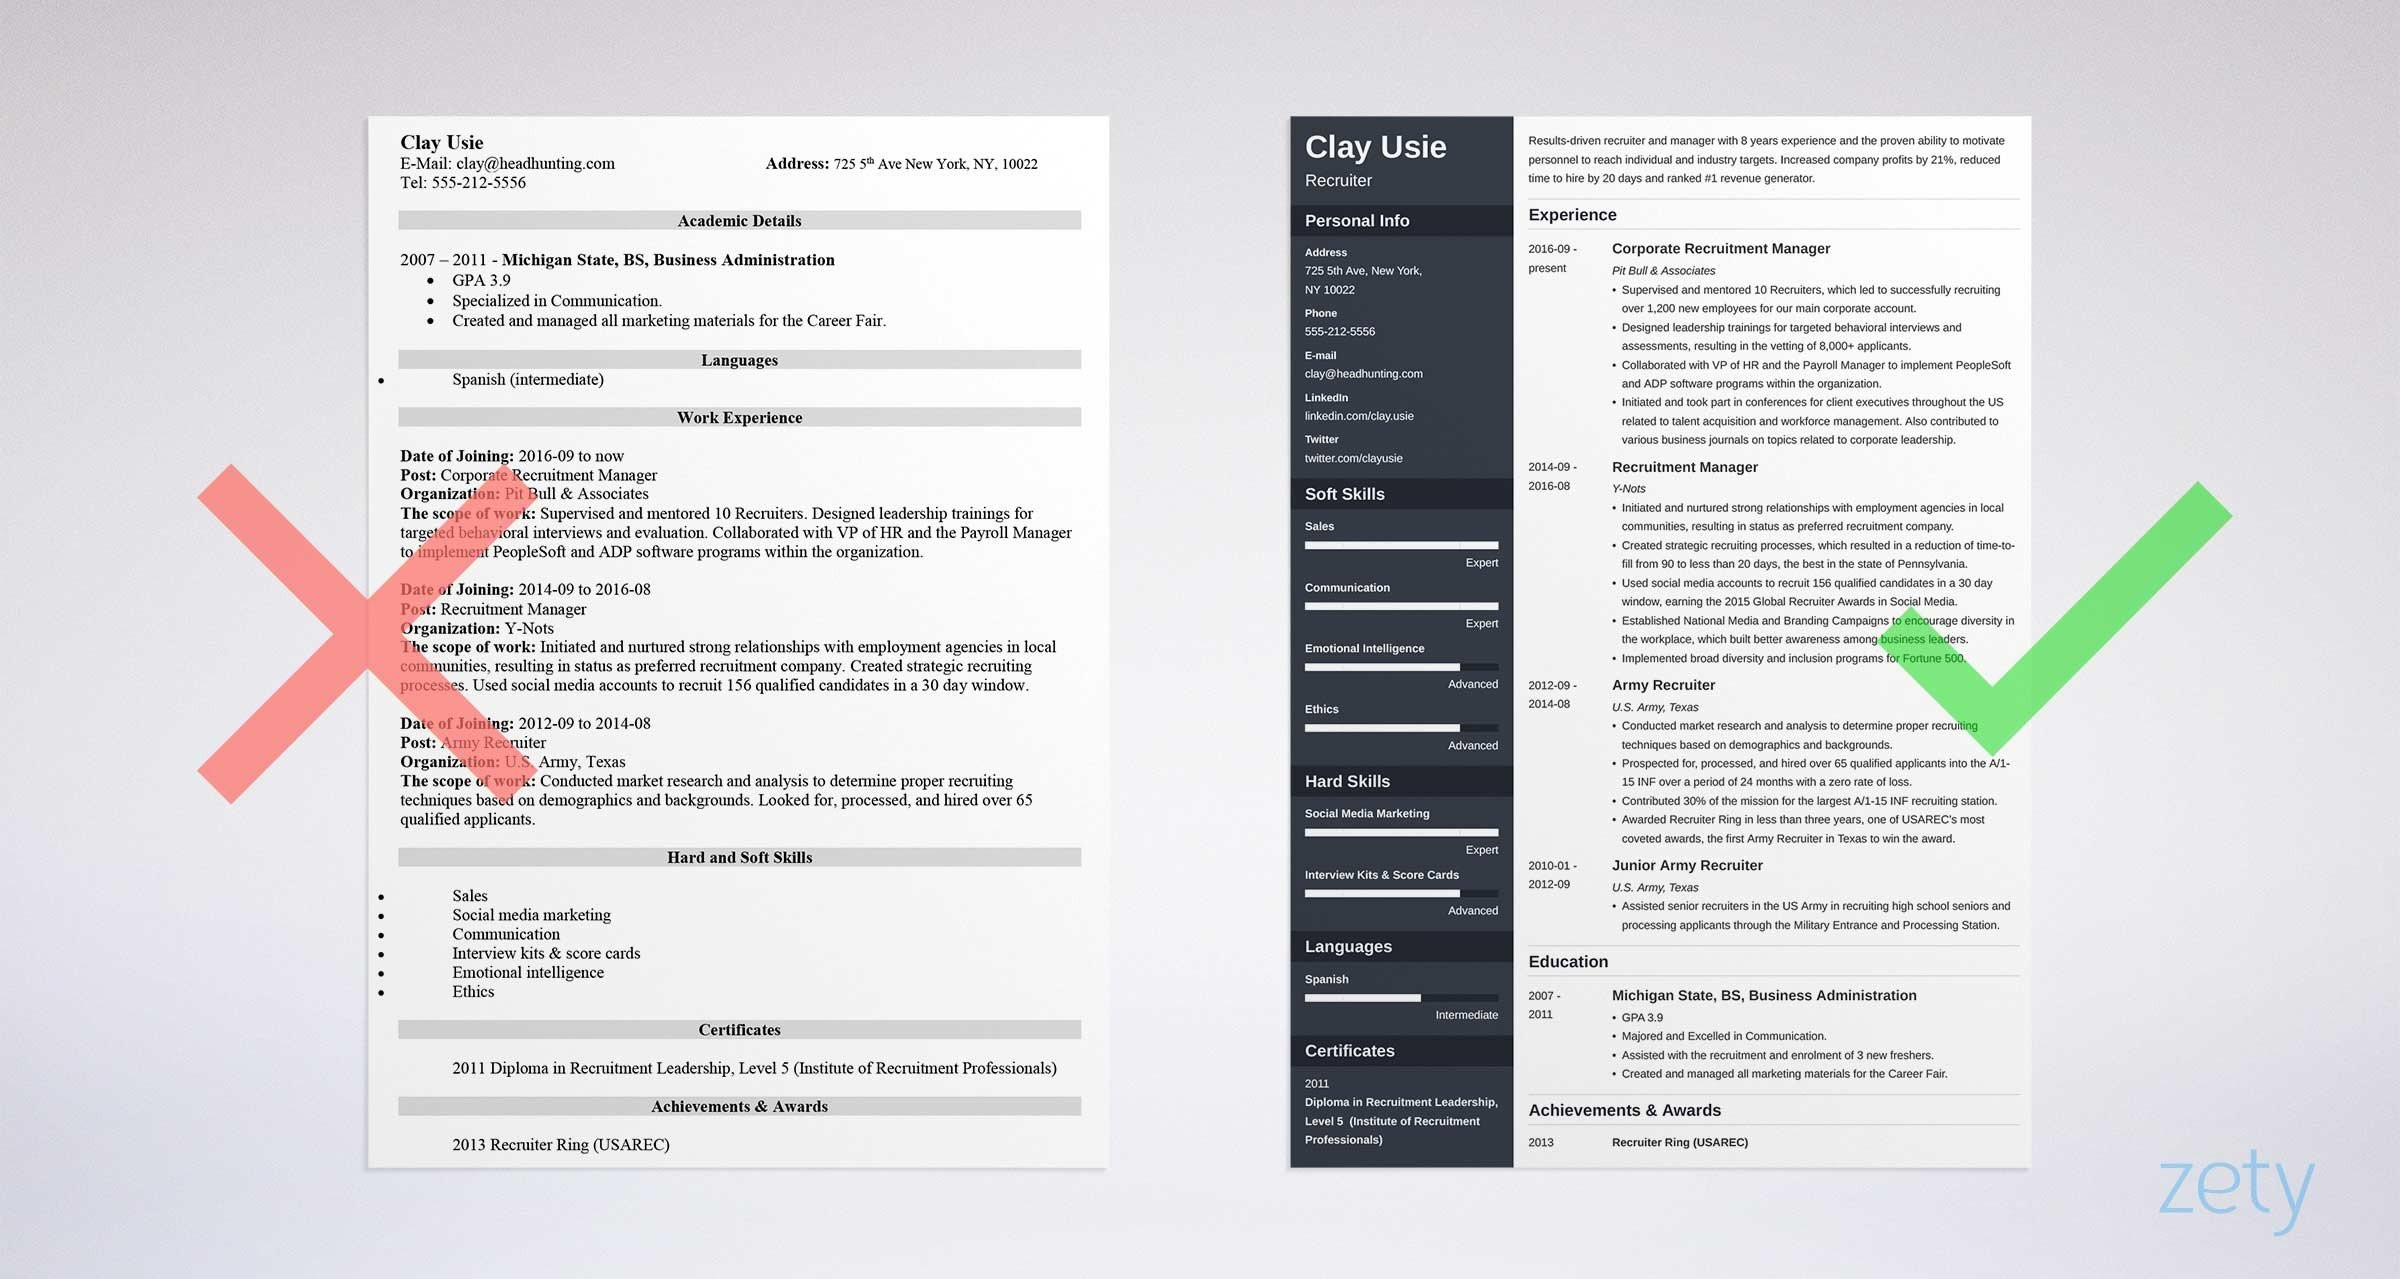 Sample Resume for Experienced It Recruiter Recruiter Resume Sample [entry Level, It, Hr, Corporate]